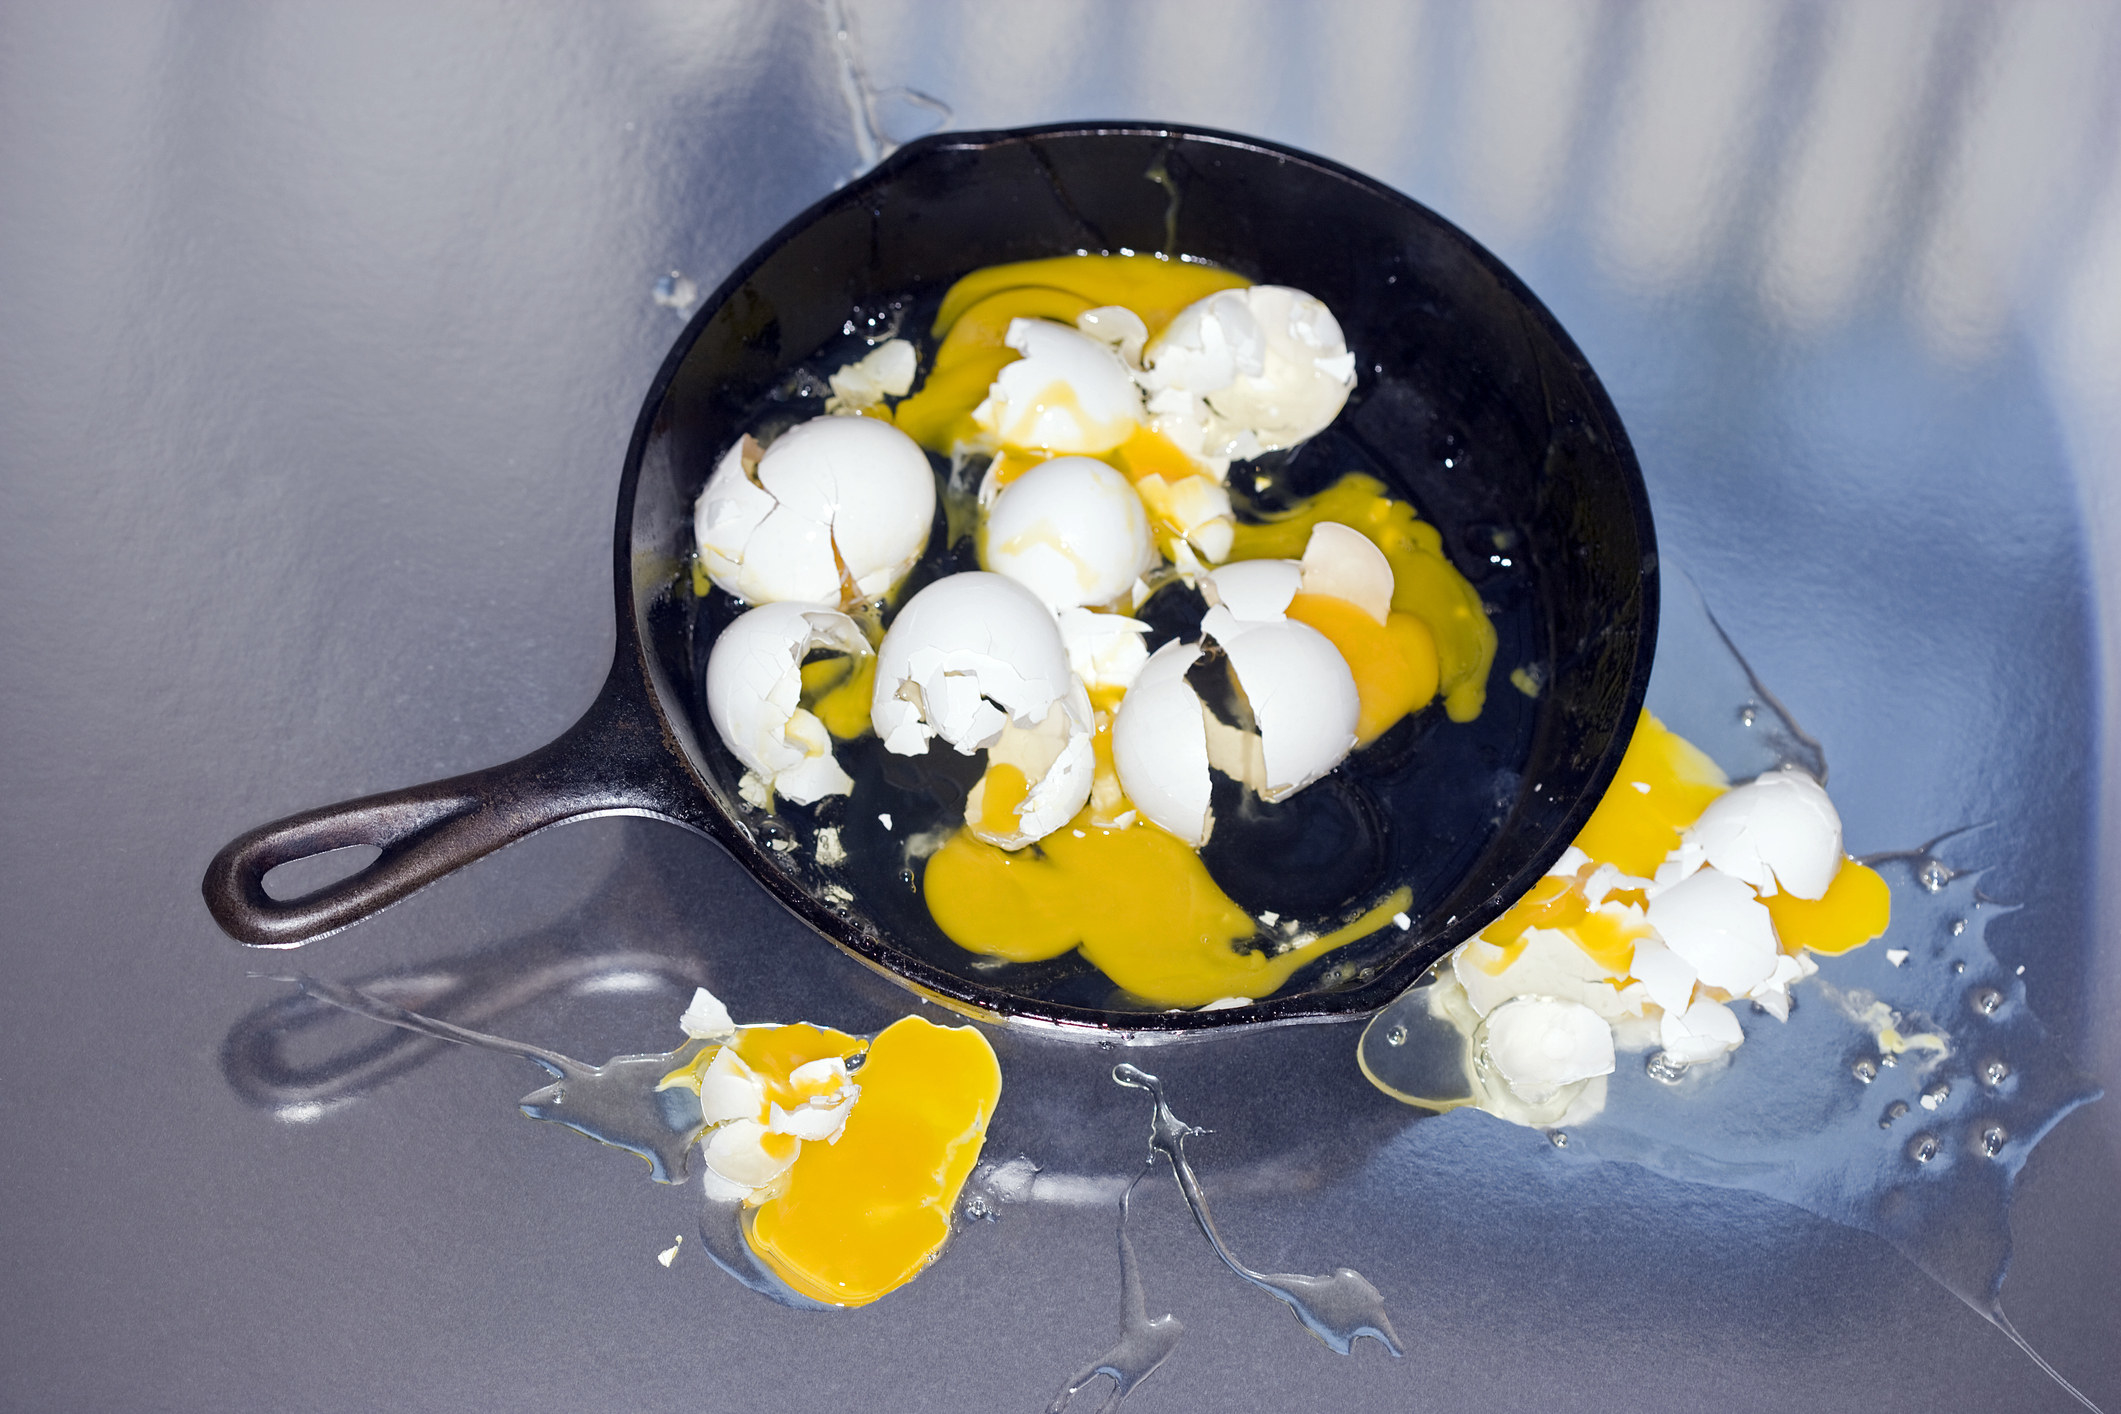 Eggs and eggshell in a frying pan